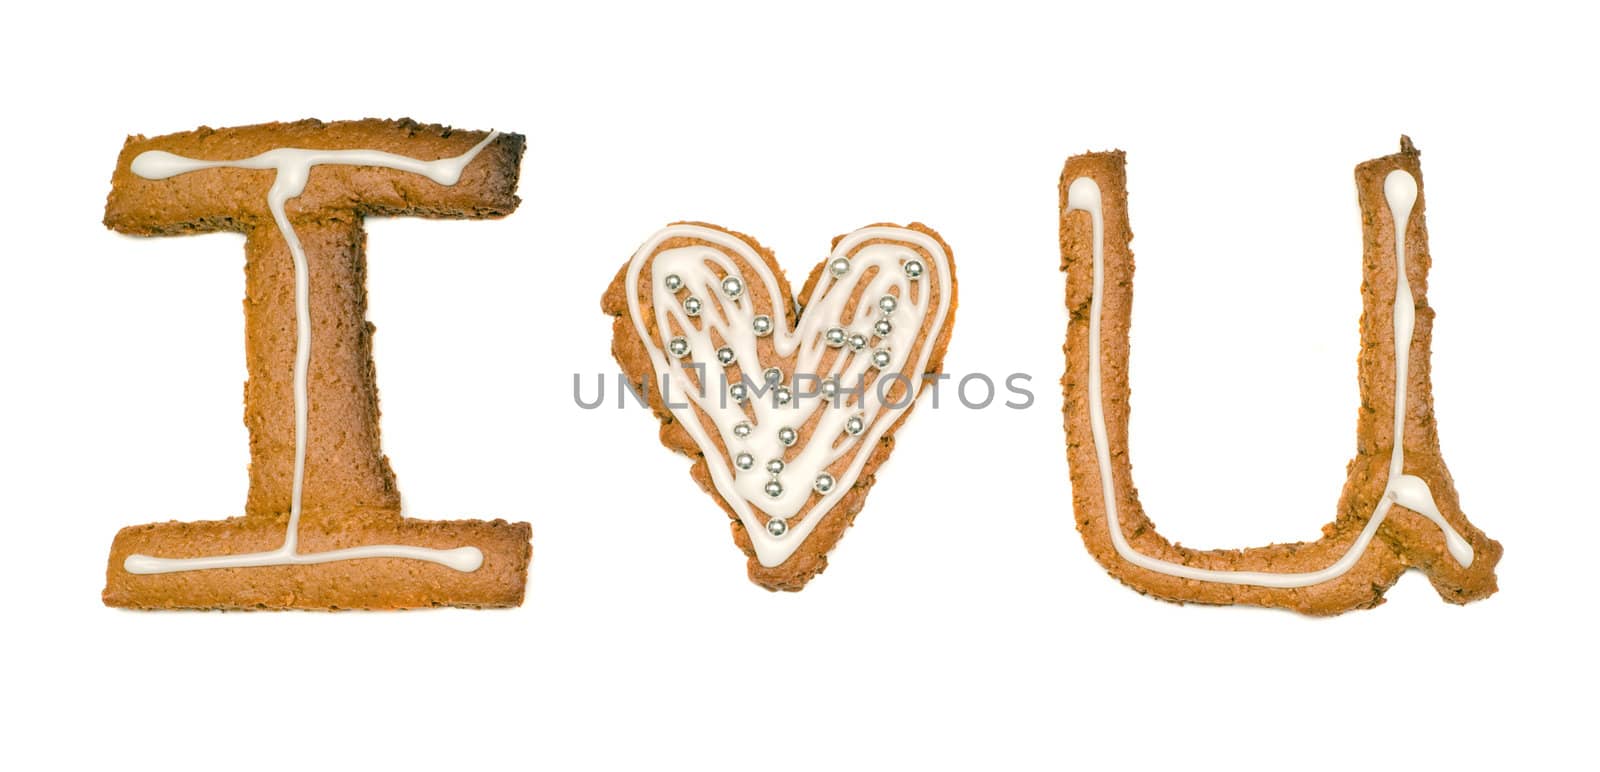 Closeup view of three cookies cut out into shapes that spell I love you, isolated against a white background